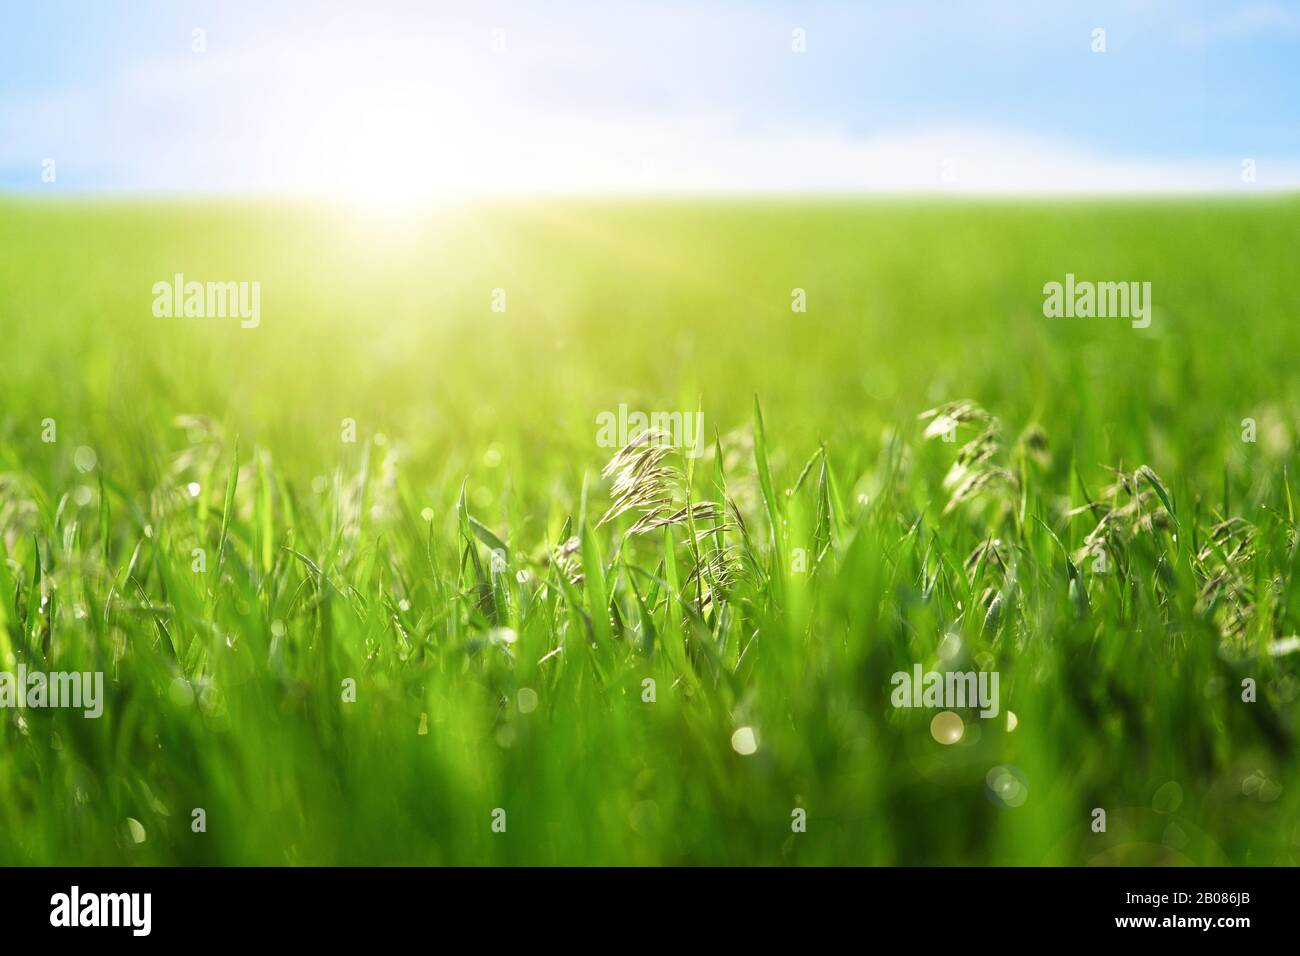 Focus on the spikelet of grass. Bright sun Stock Photo